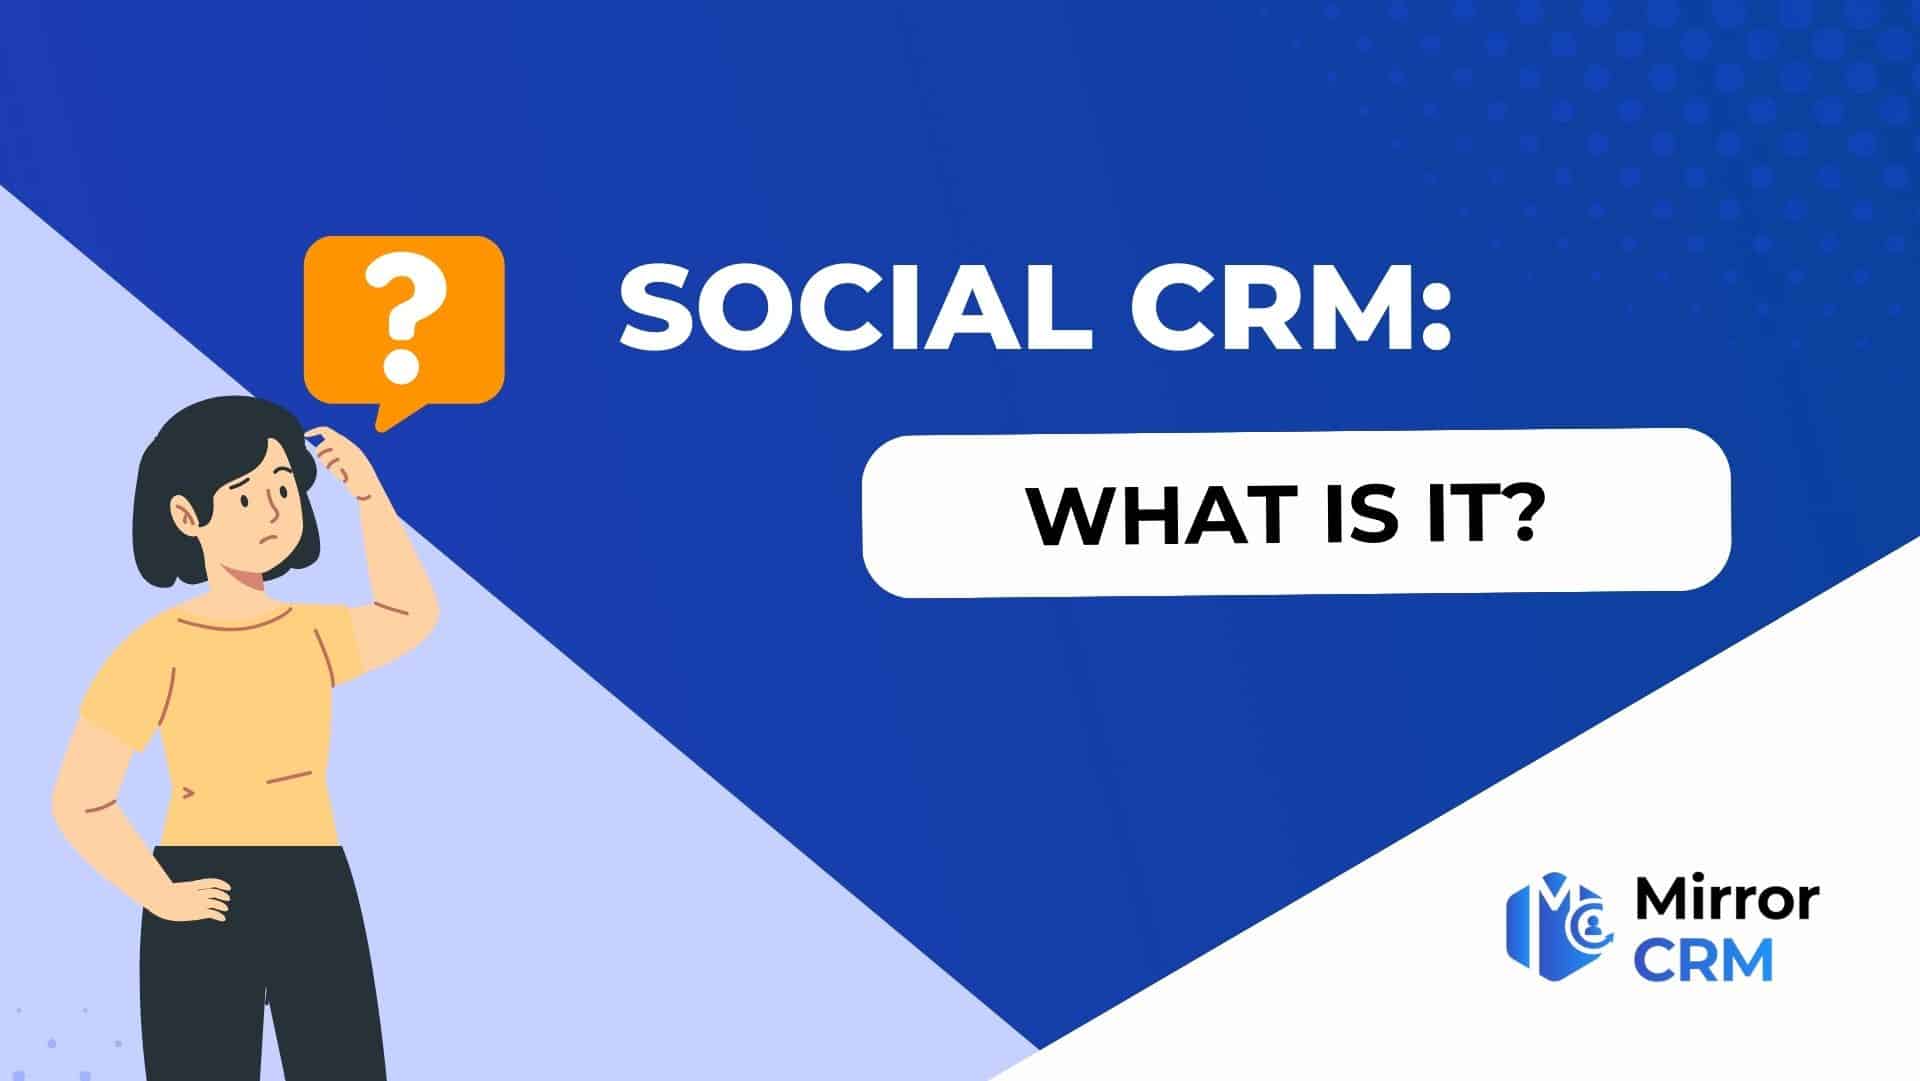 Social CRM: What is it?